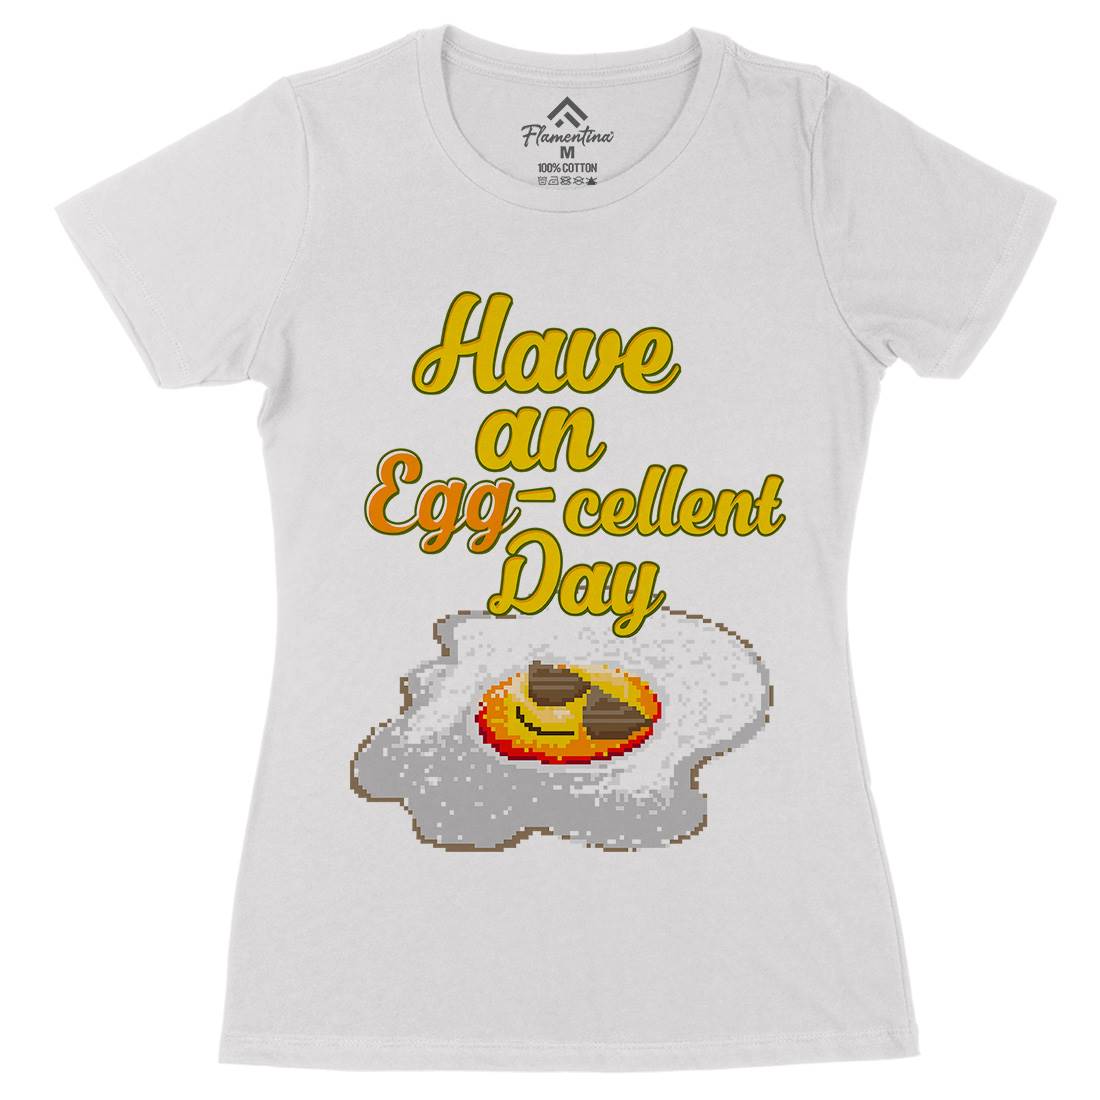 Have An Eggcellent Day Womens Organic Crew Neck T-Shirt Food B911